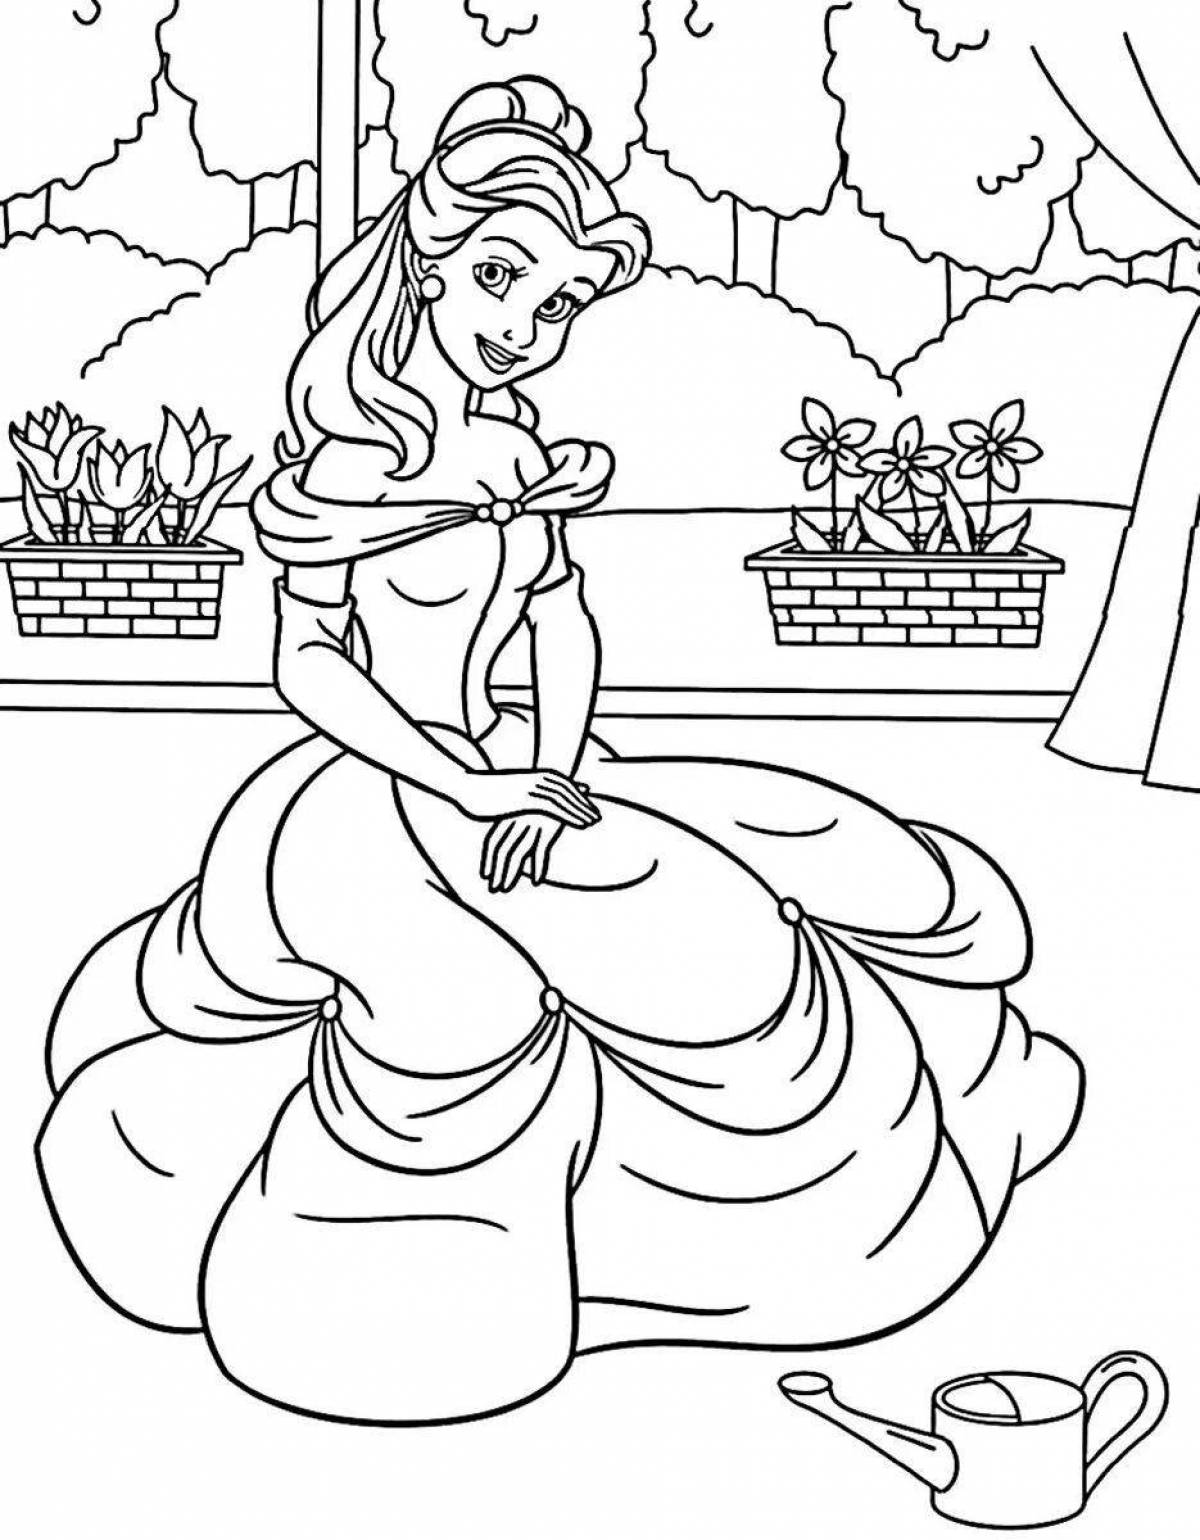 Fun coloring book for 5 year old girls